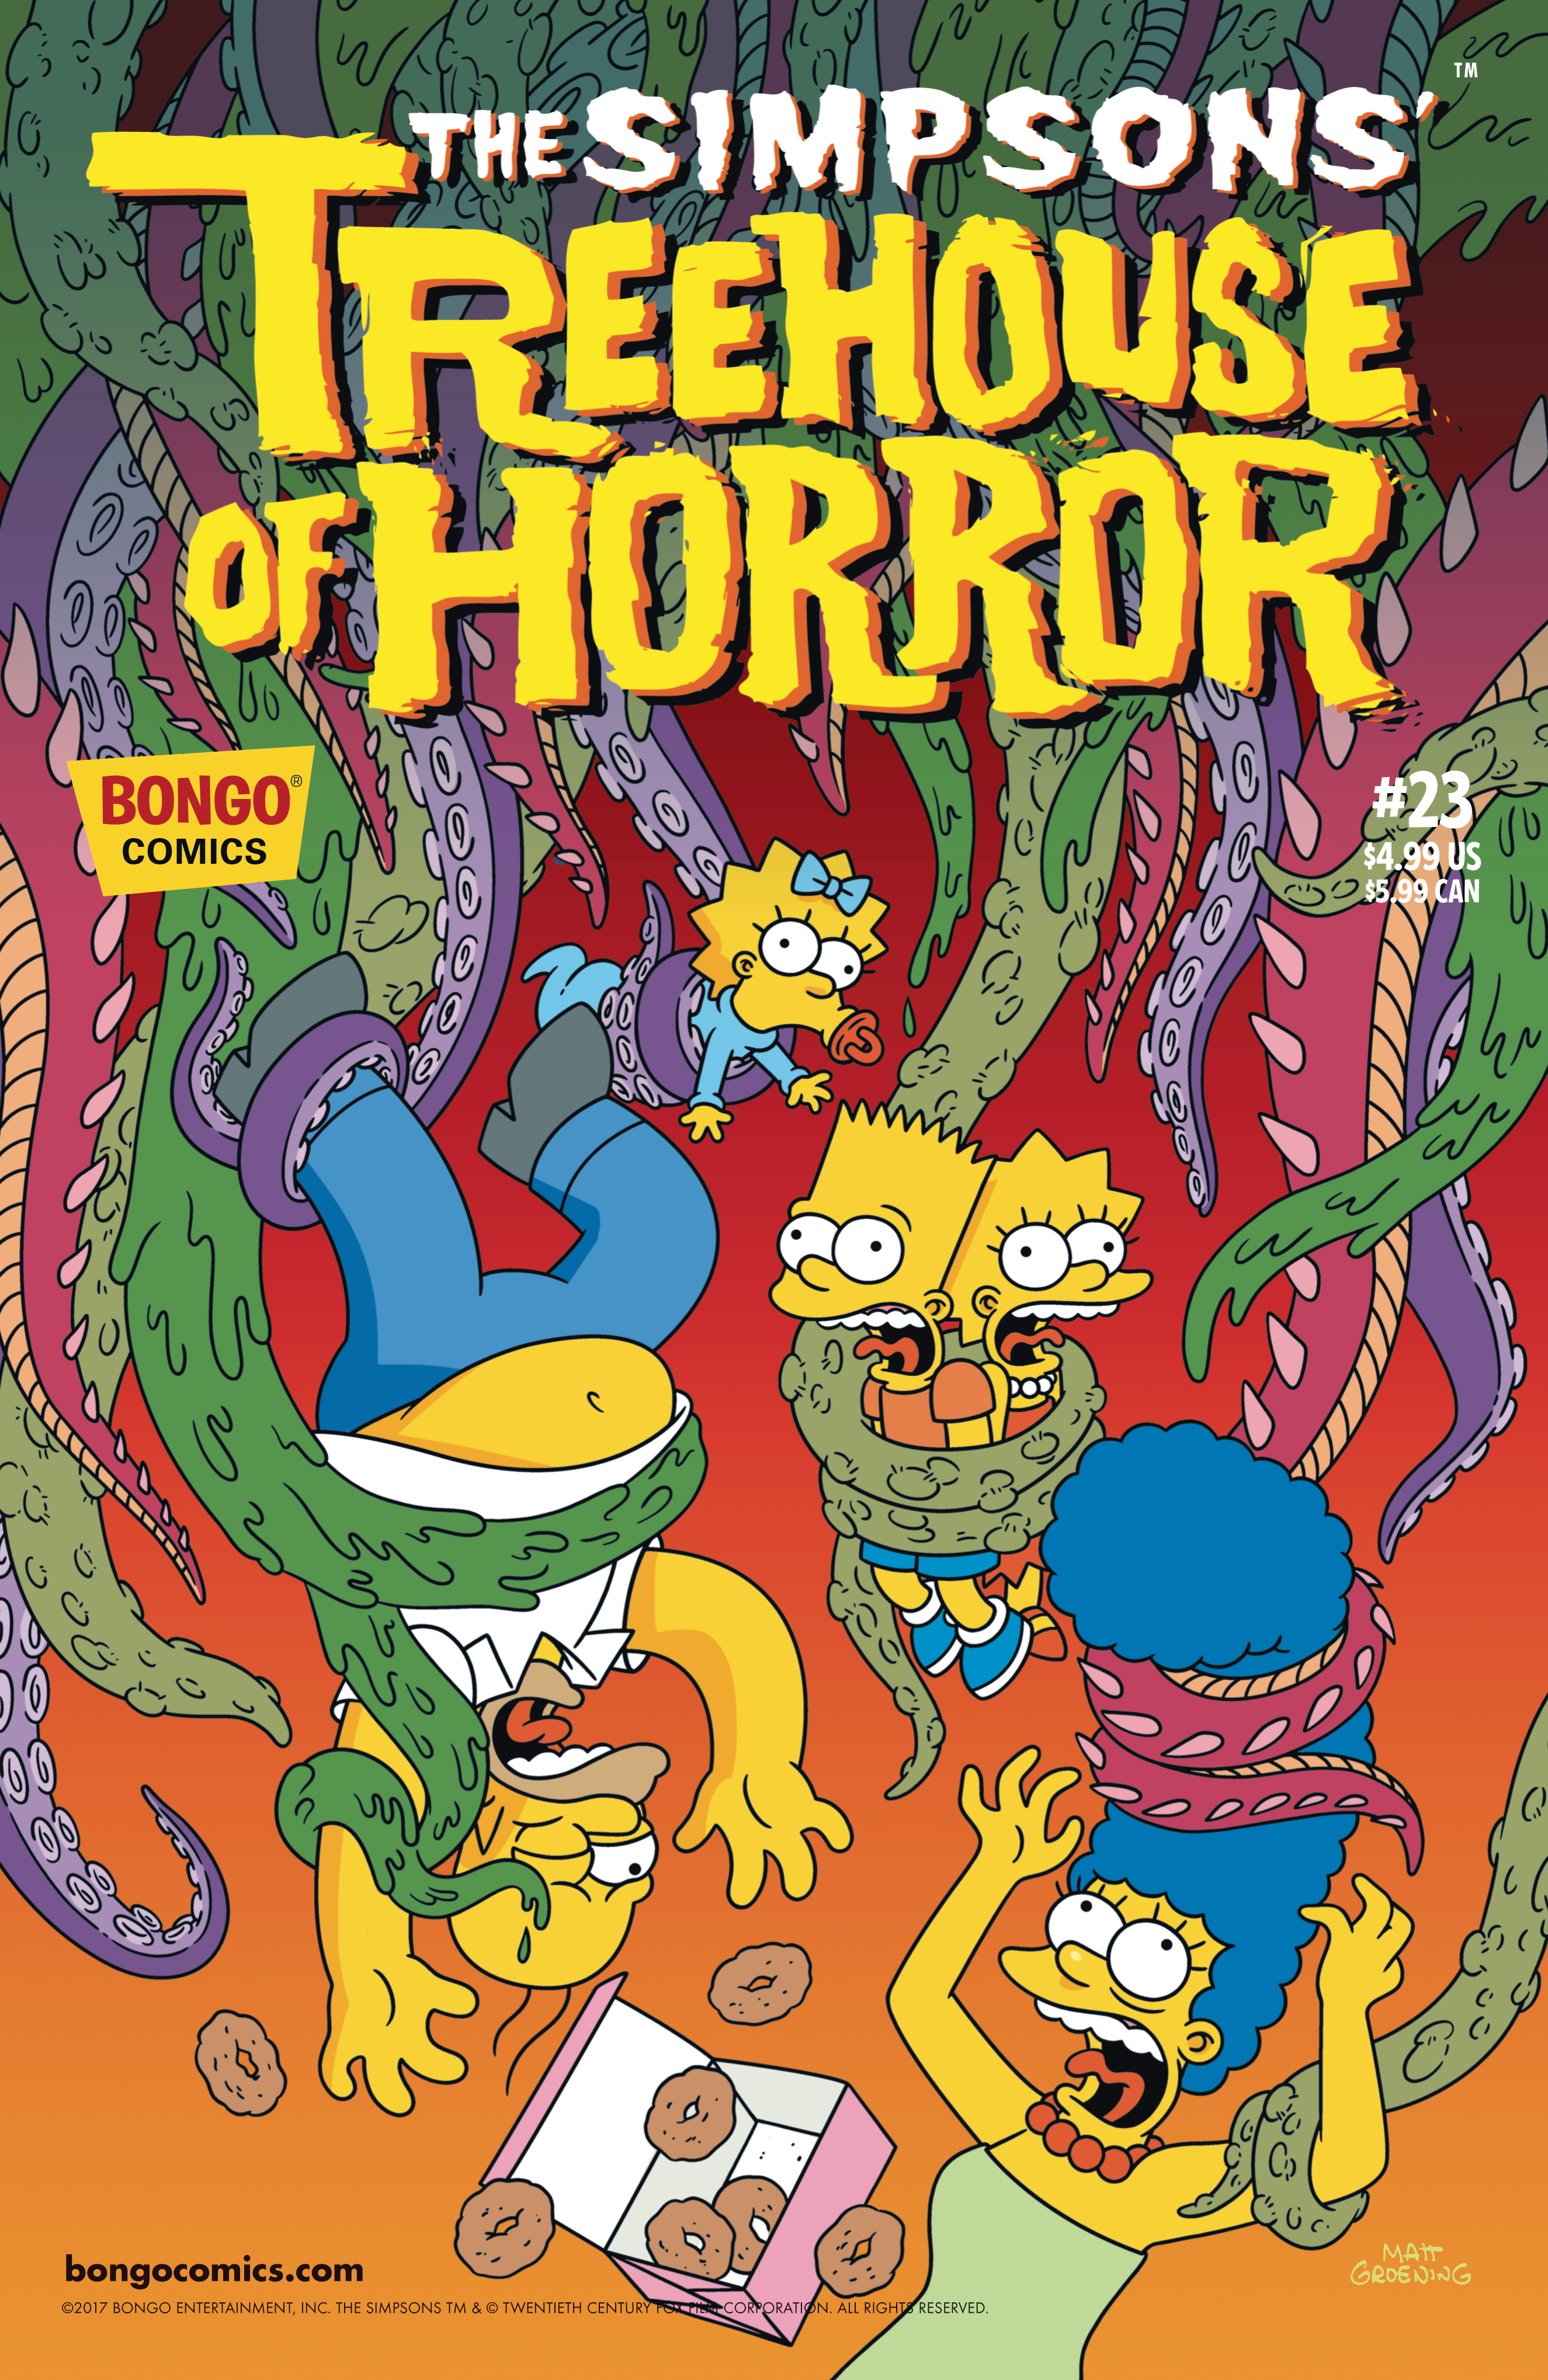 JUL SIMPSONS TREEHOUSE OF HORROR Previews World